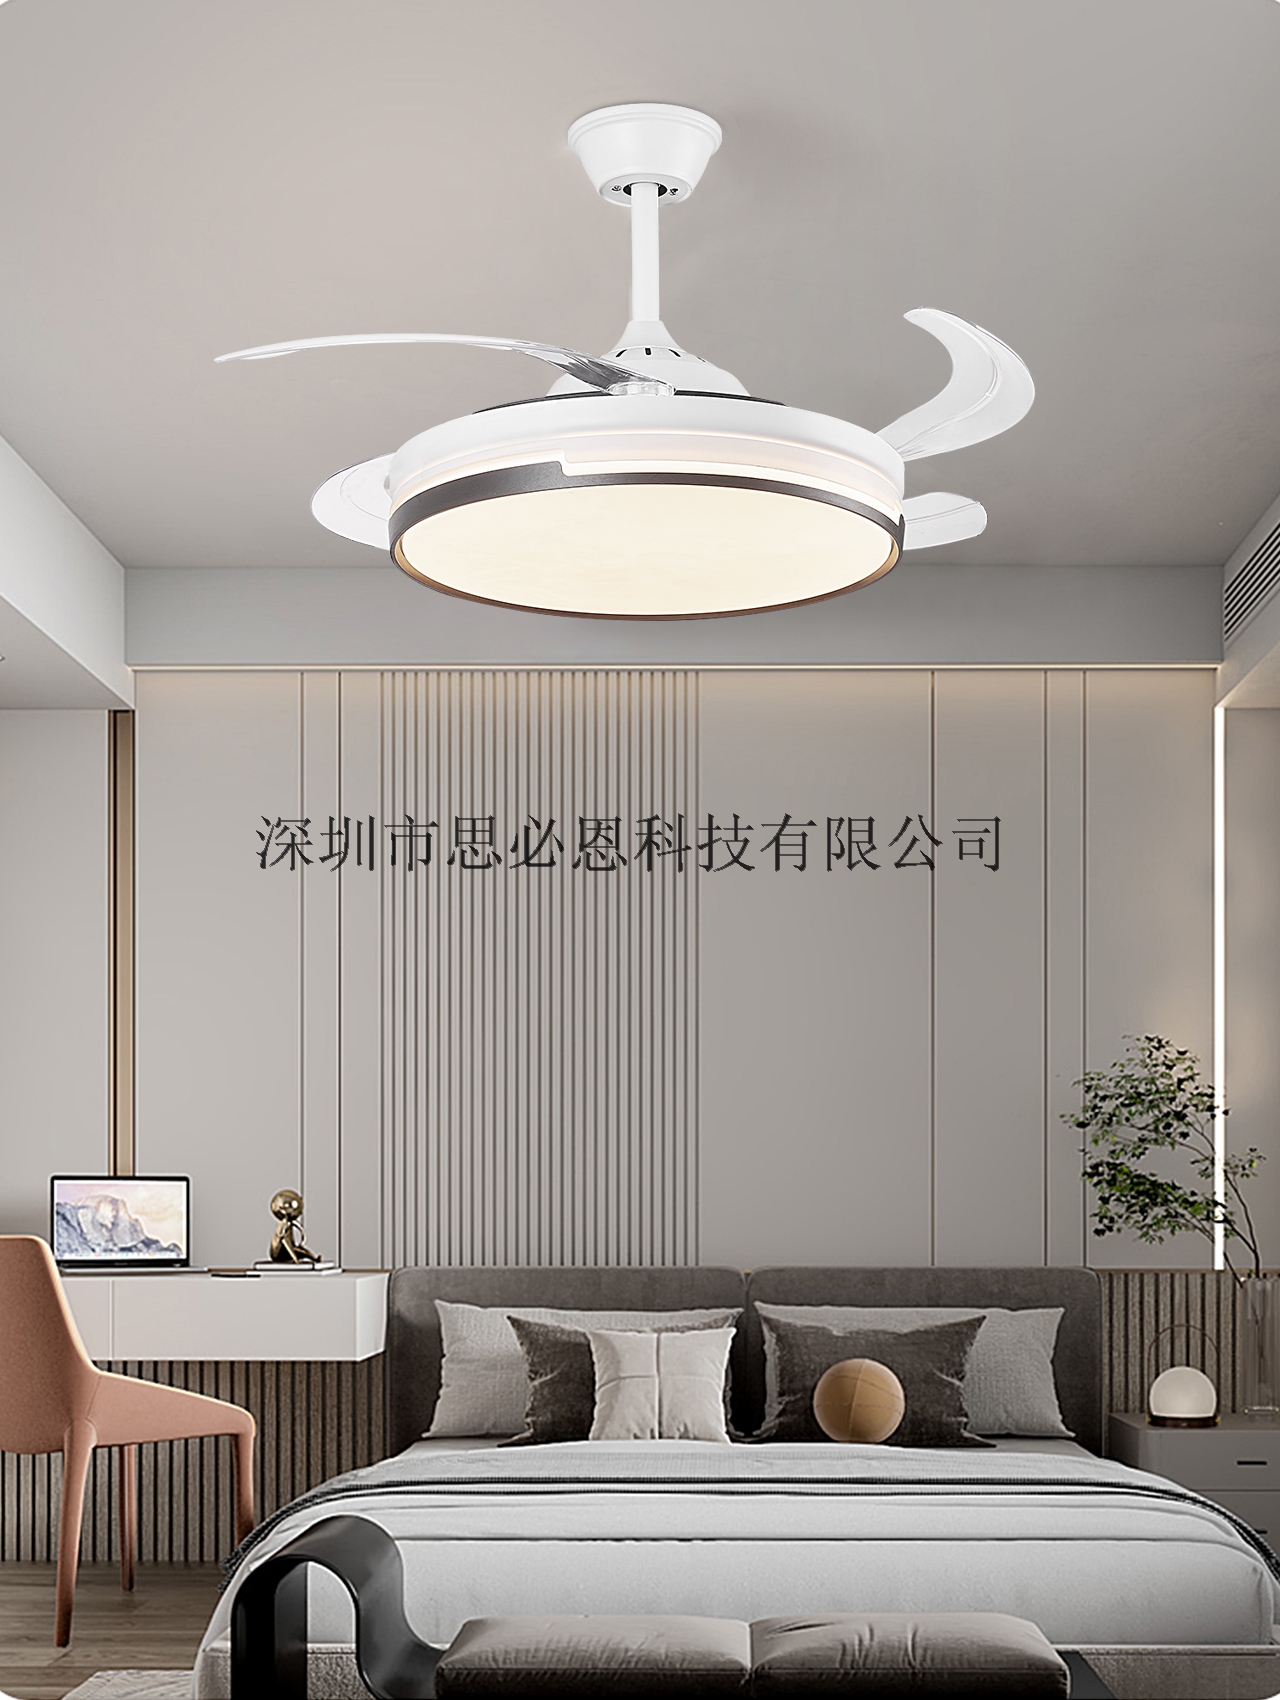 Retractable Ceiling Lights Remote Control Dimmable 42inch Modern Chandeliers Ceiling Fan For Bedroom